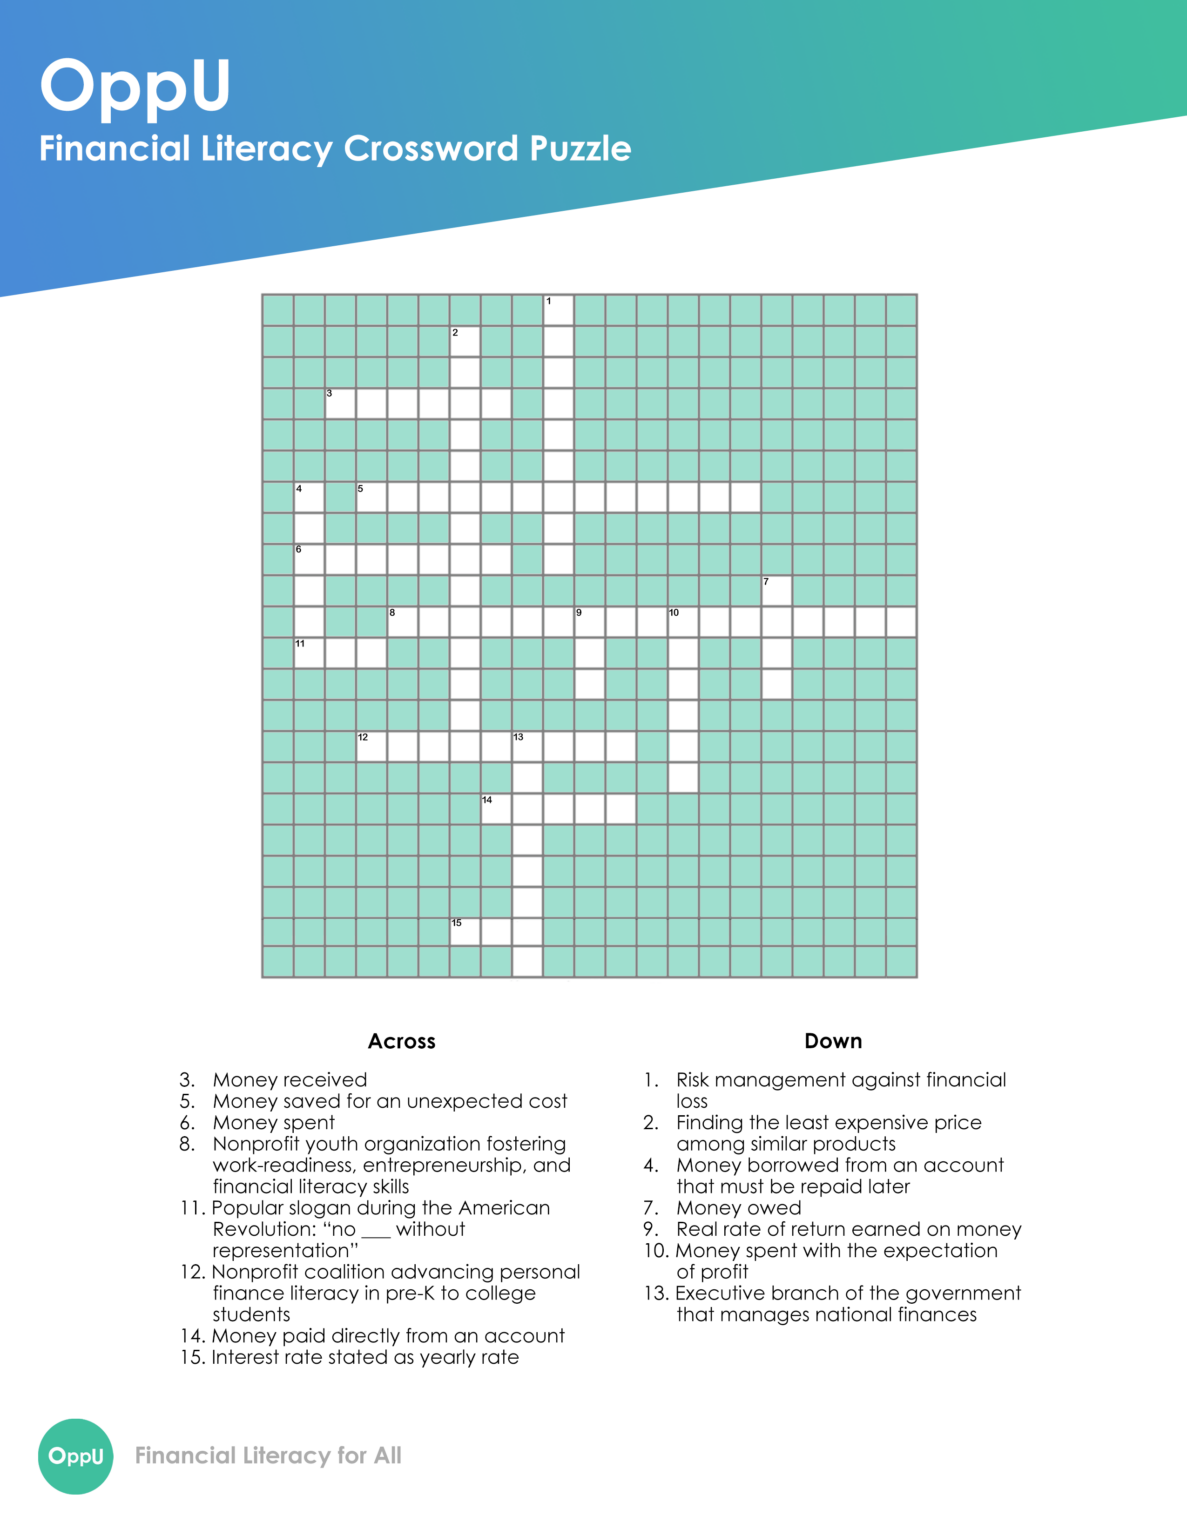 Financial Literacy Crossword Puzzles OppU